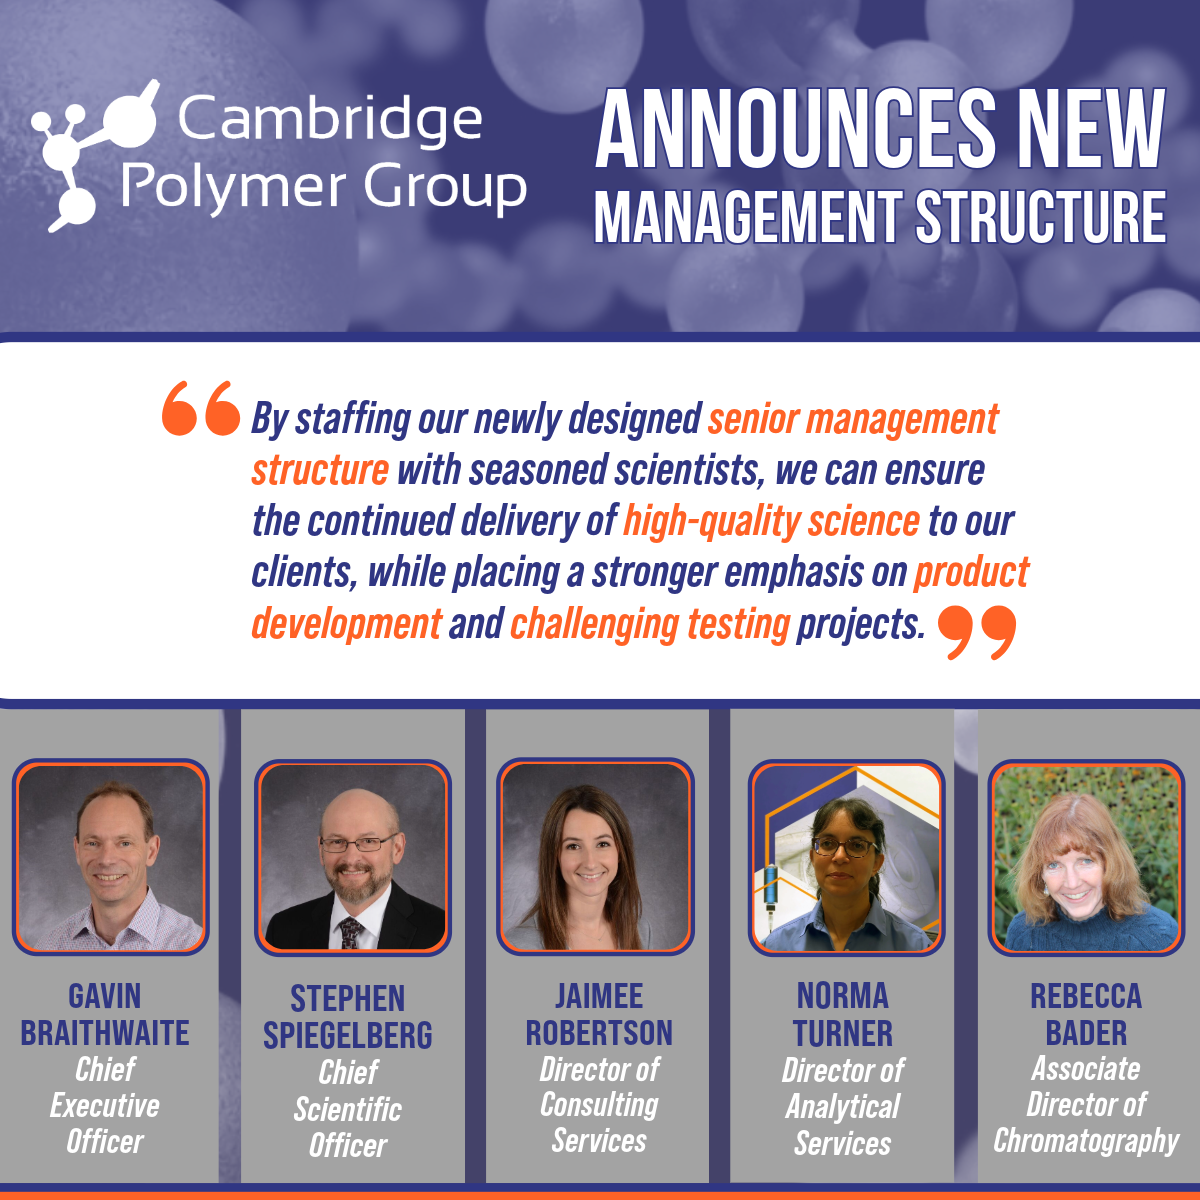 Cambridge Polymer Group Unveils Restructure to Accelerate Client Innovation through Material Science